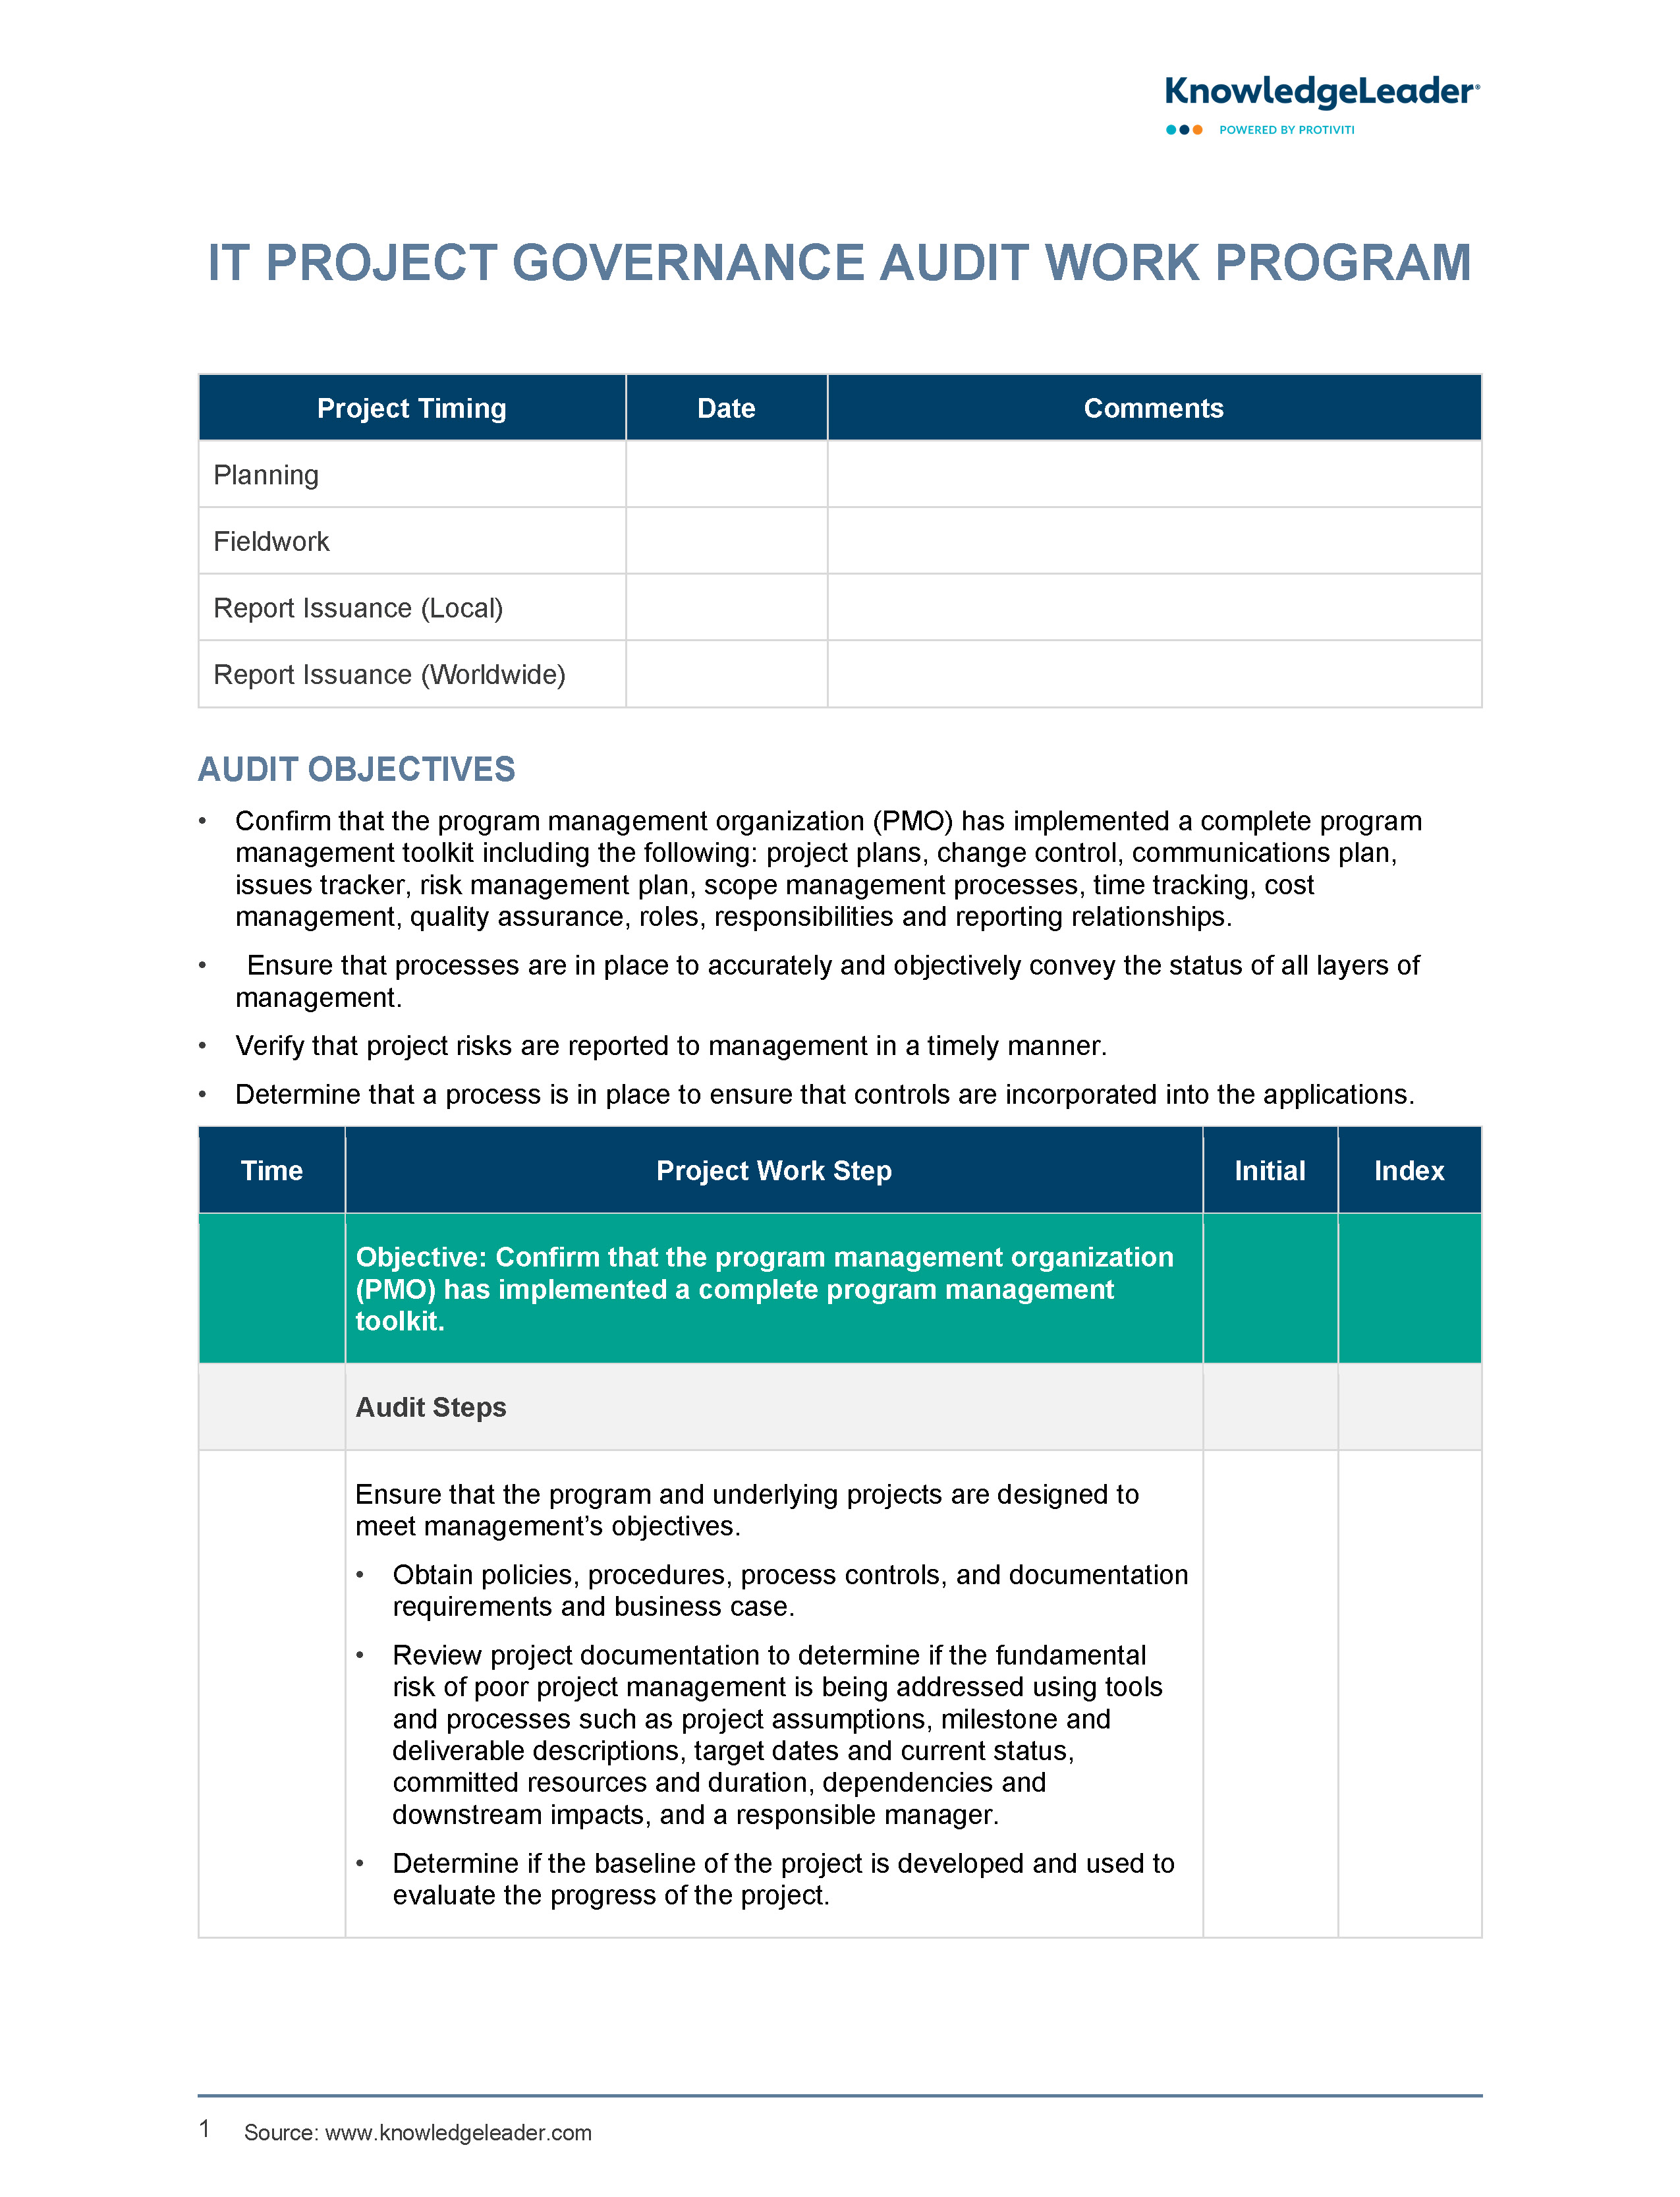 Screenshot of the first page of IT Project Governance Work Program